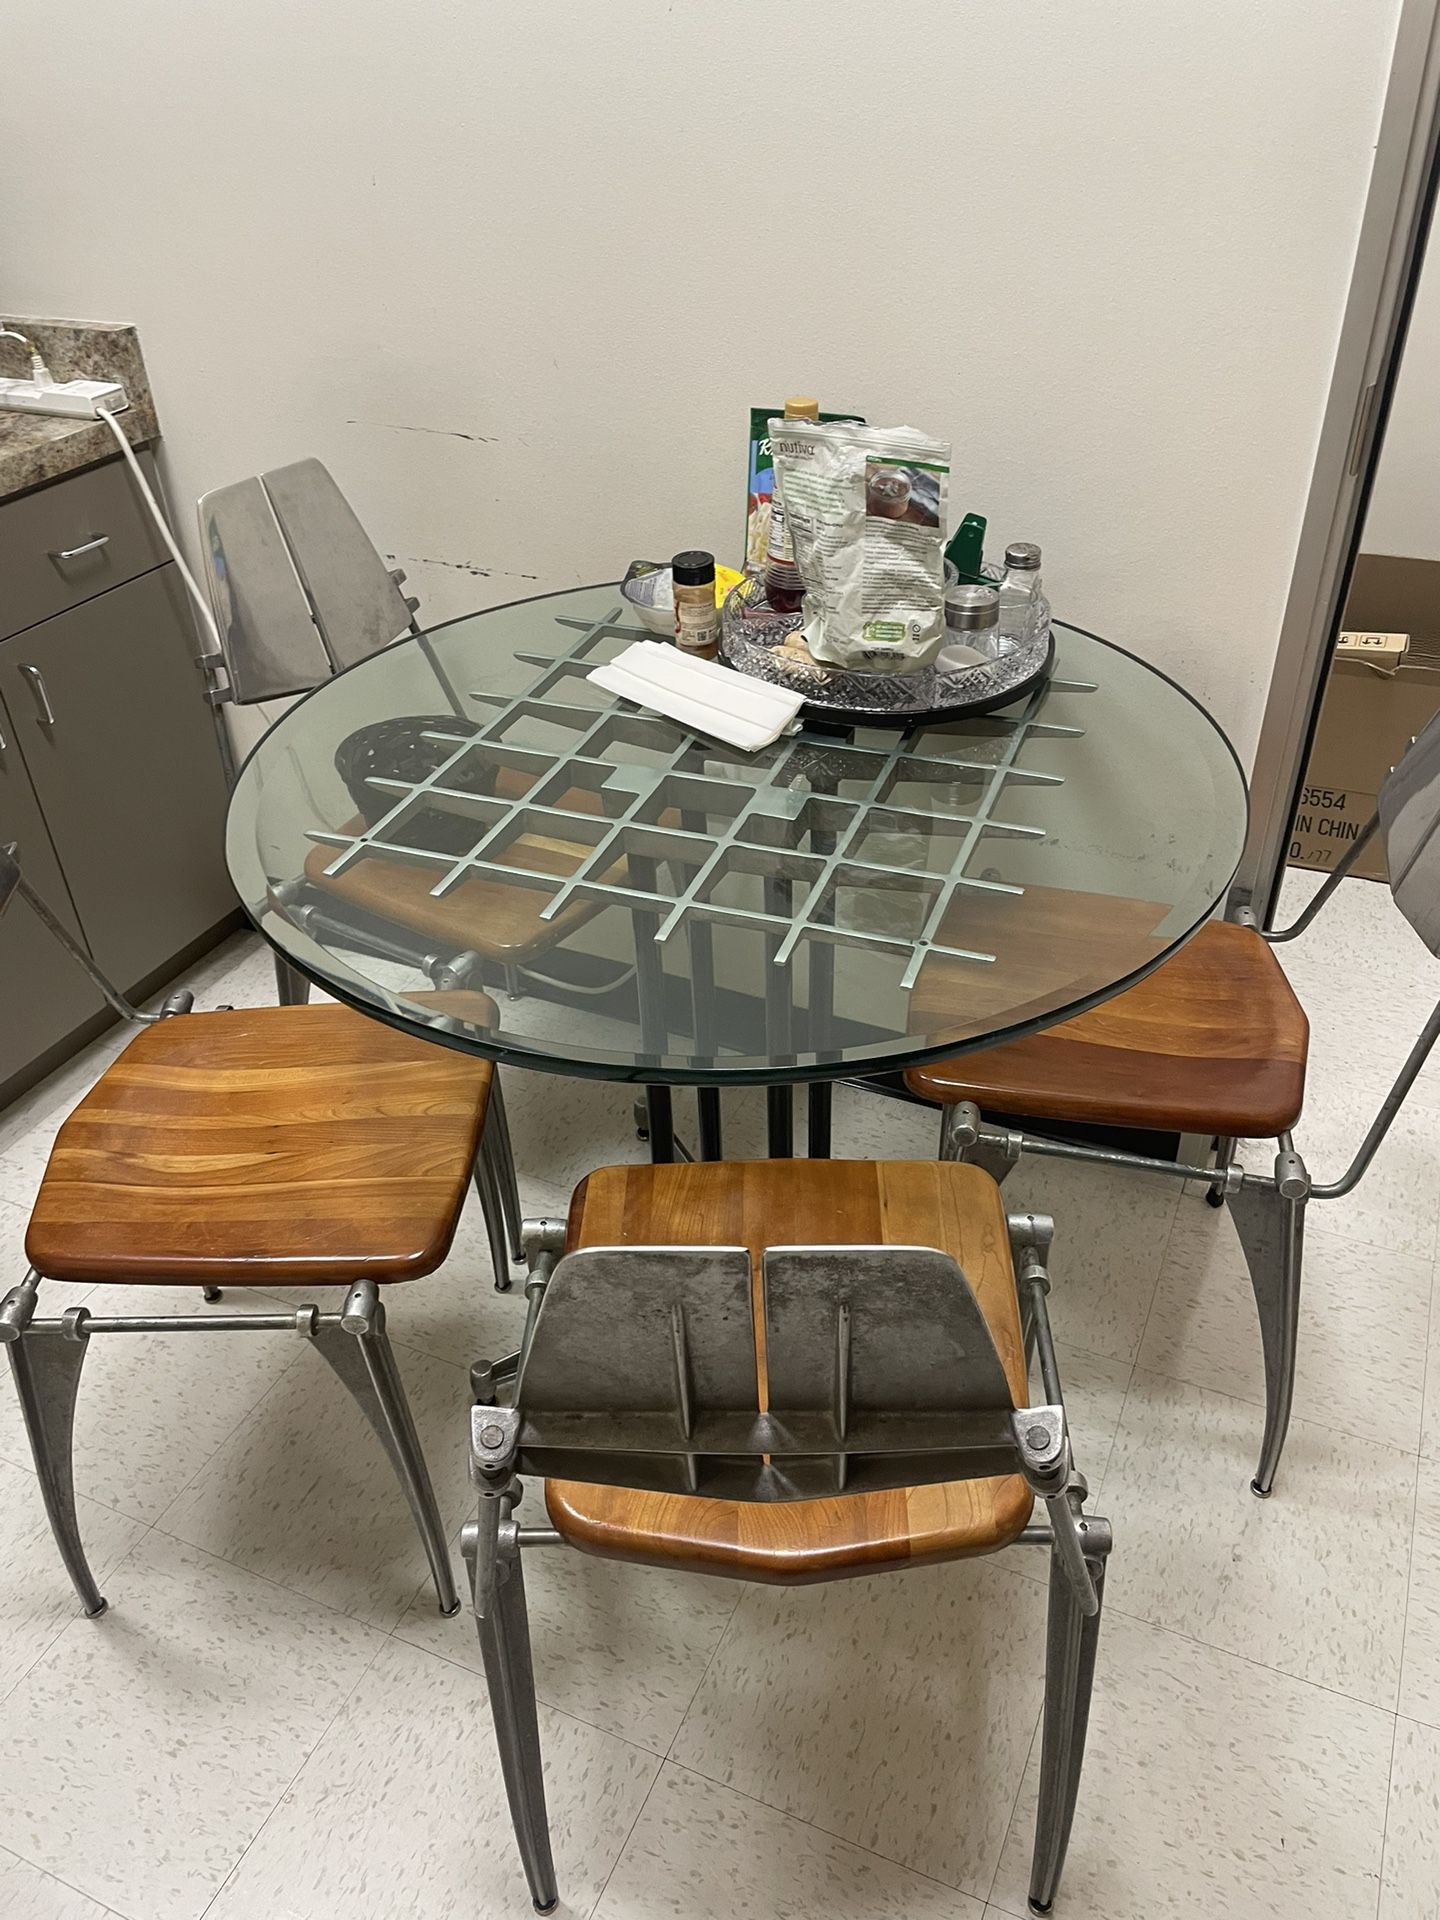 Kitchen Table With 4 Chair 